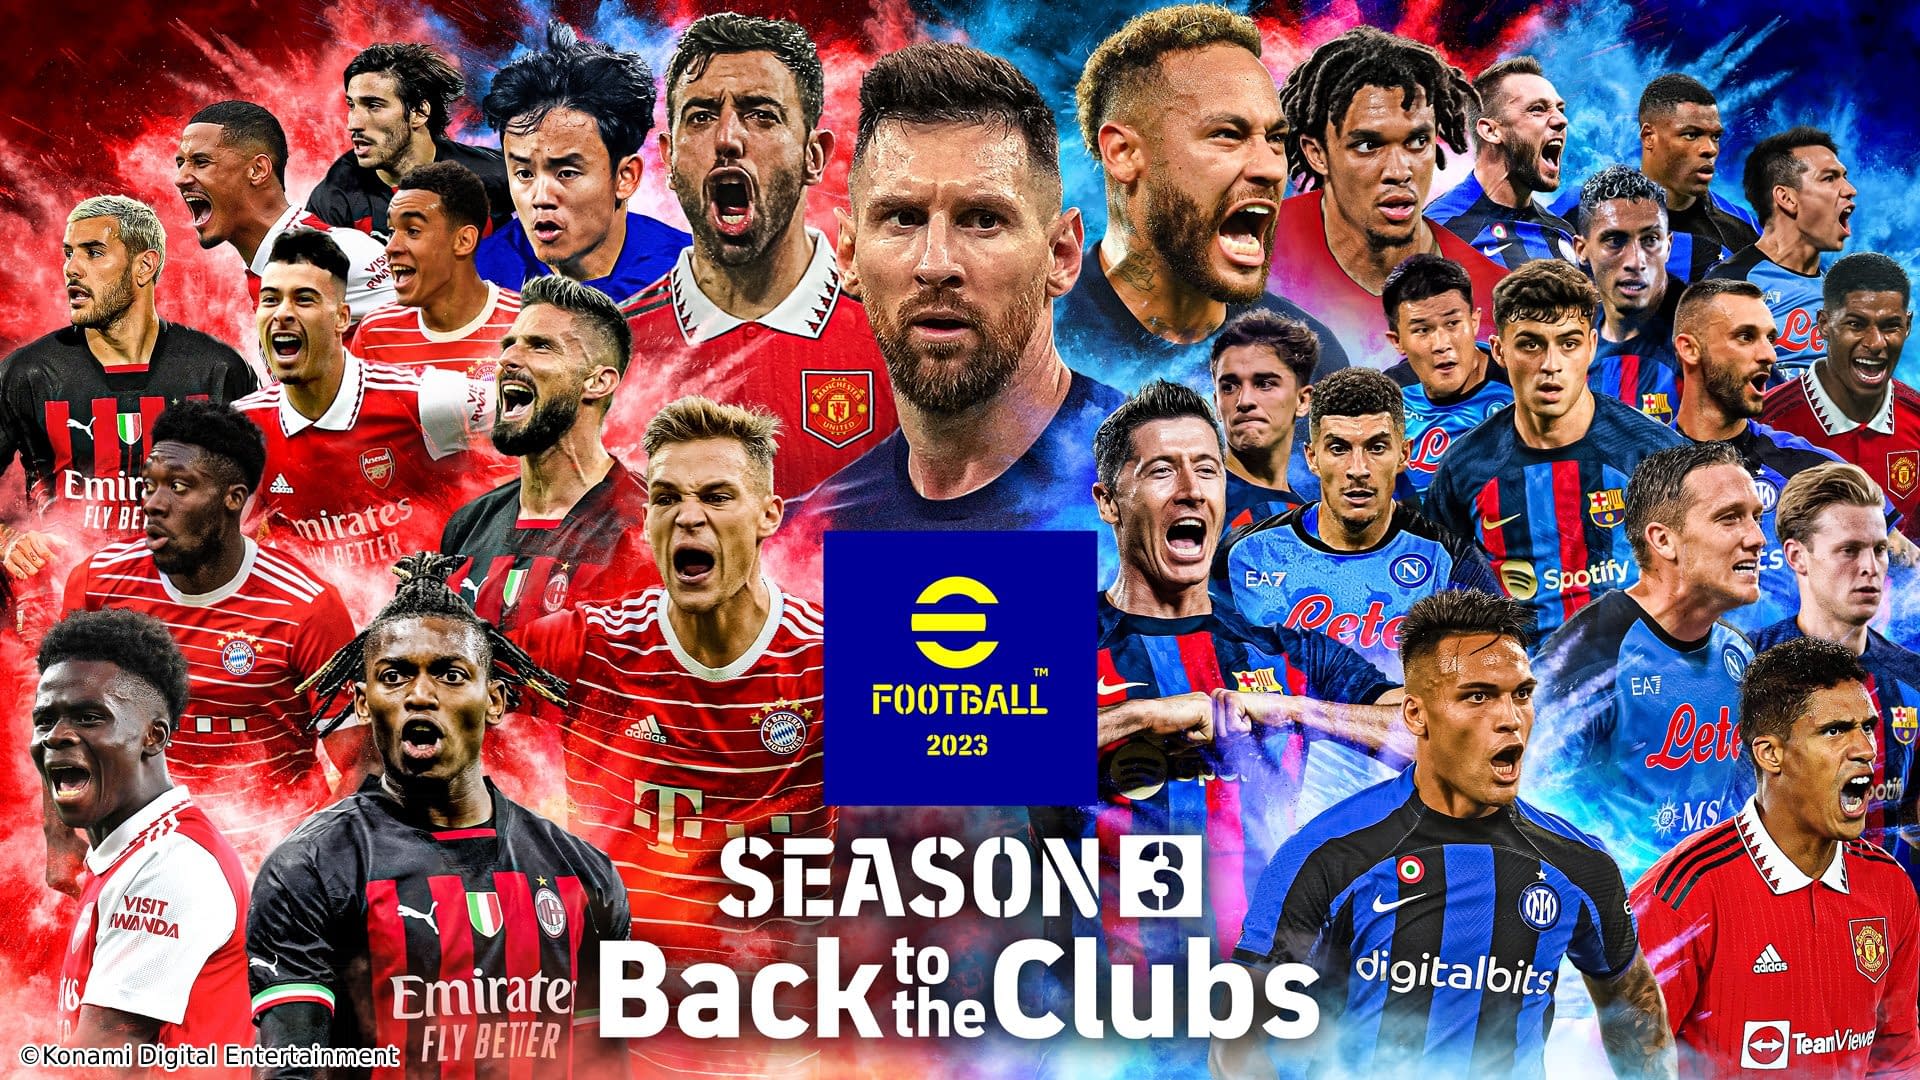 efootball 2023 New Season and ‘Back to the Club’ Now With You!